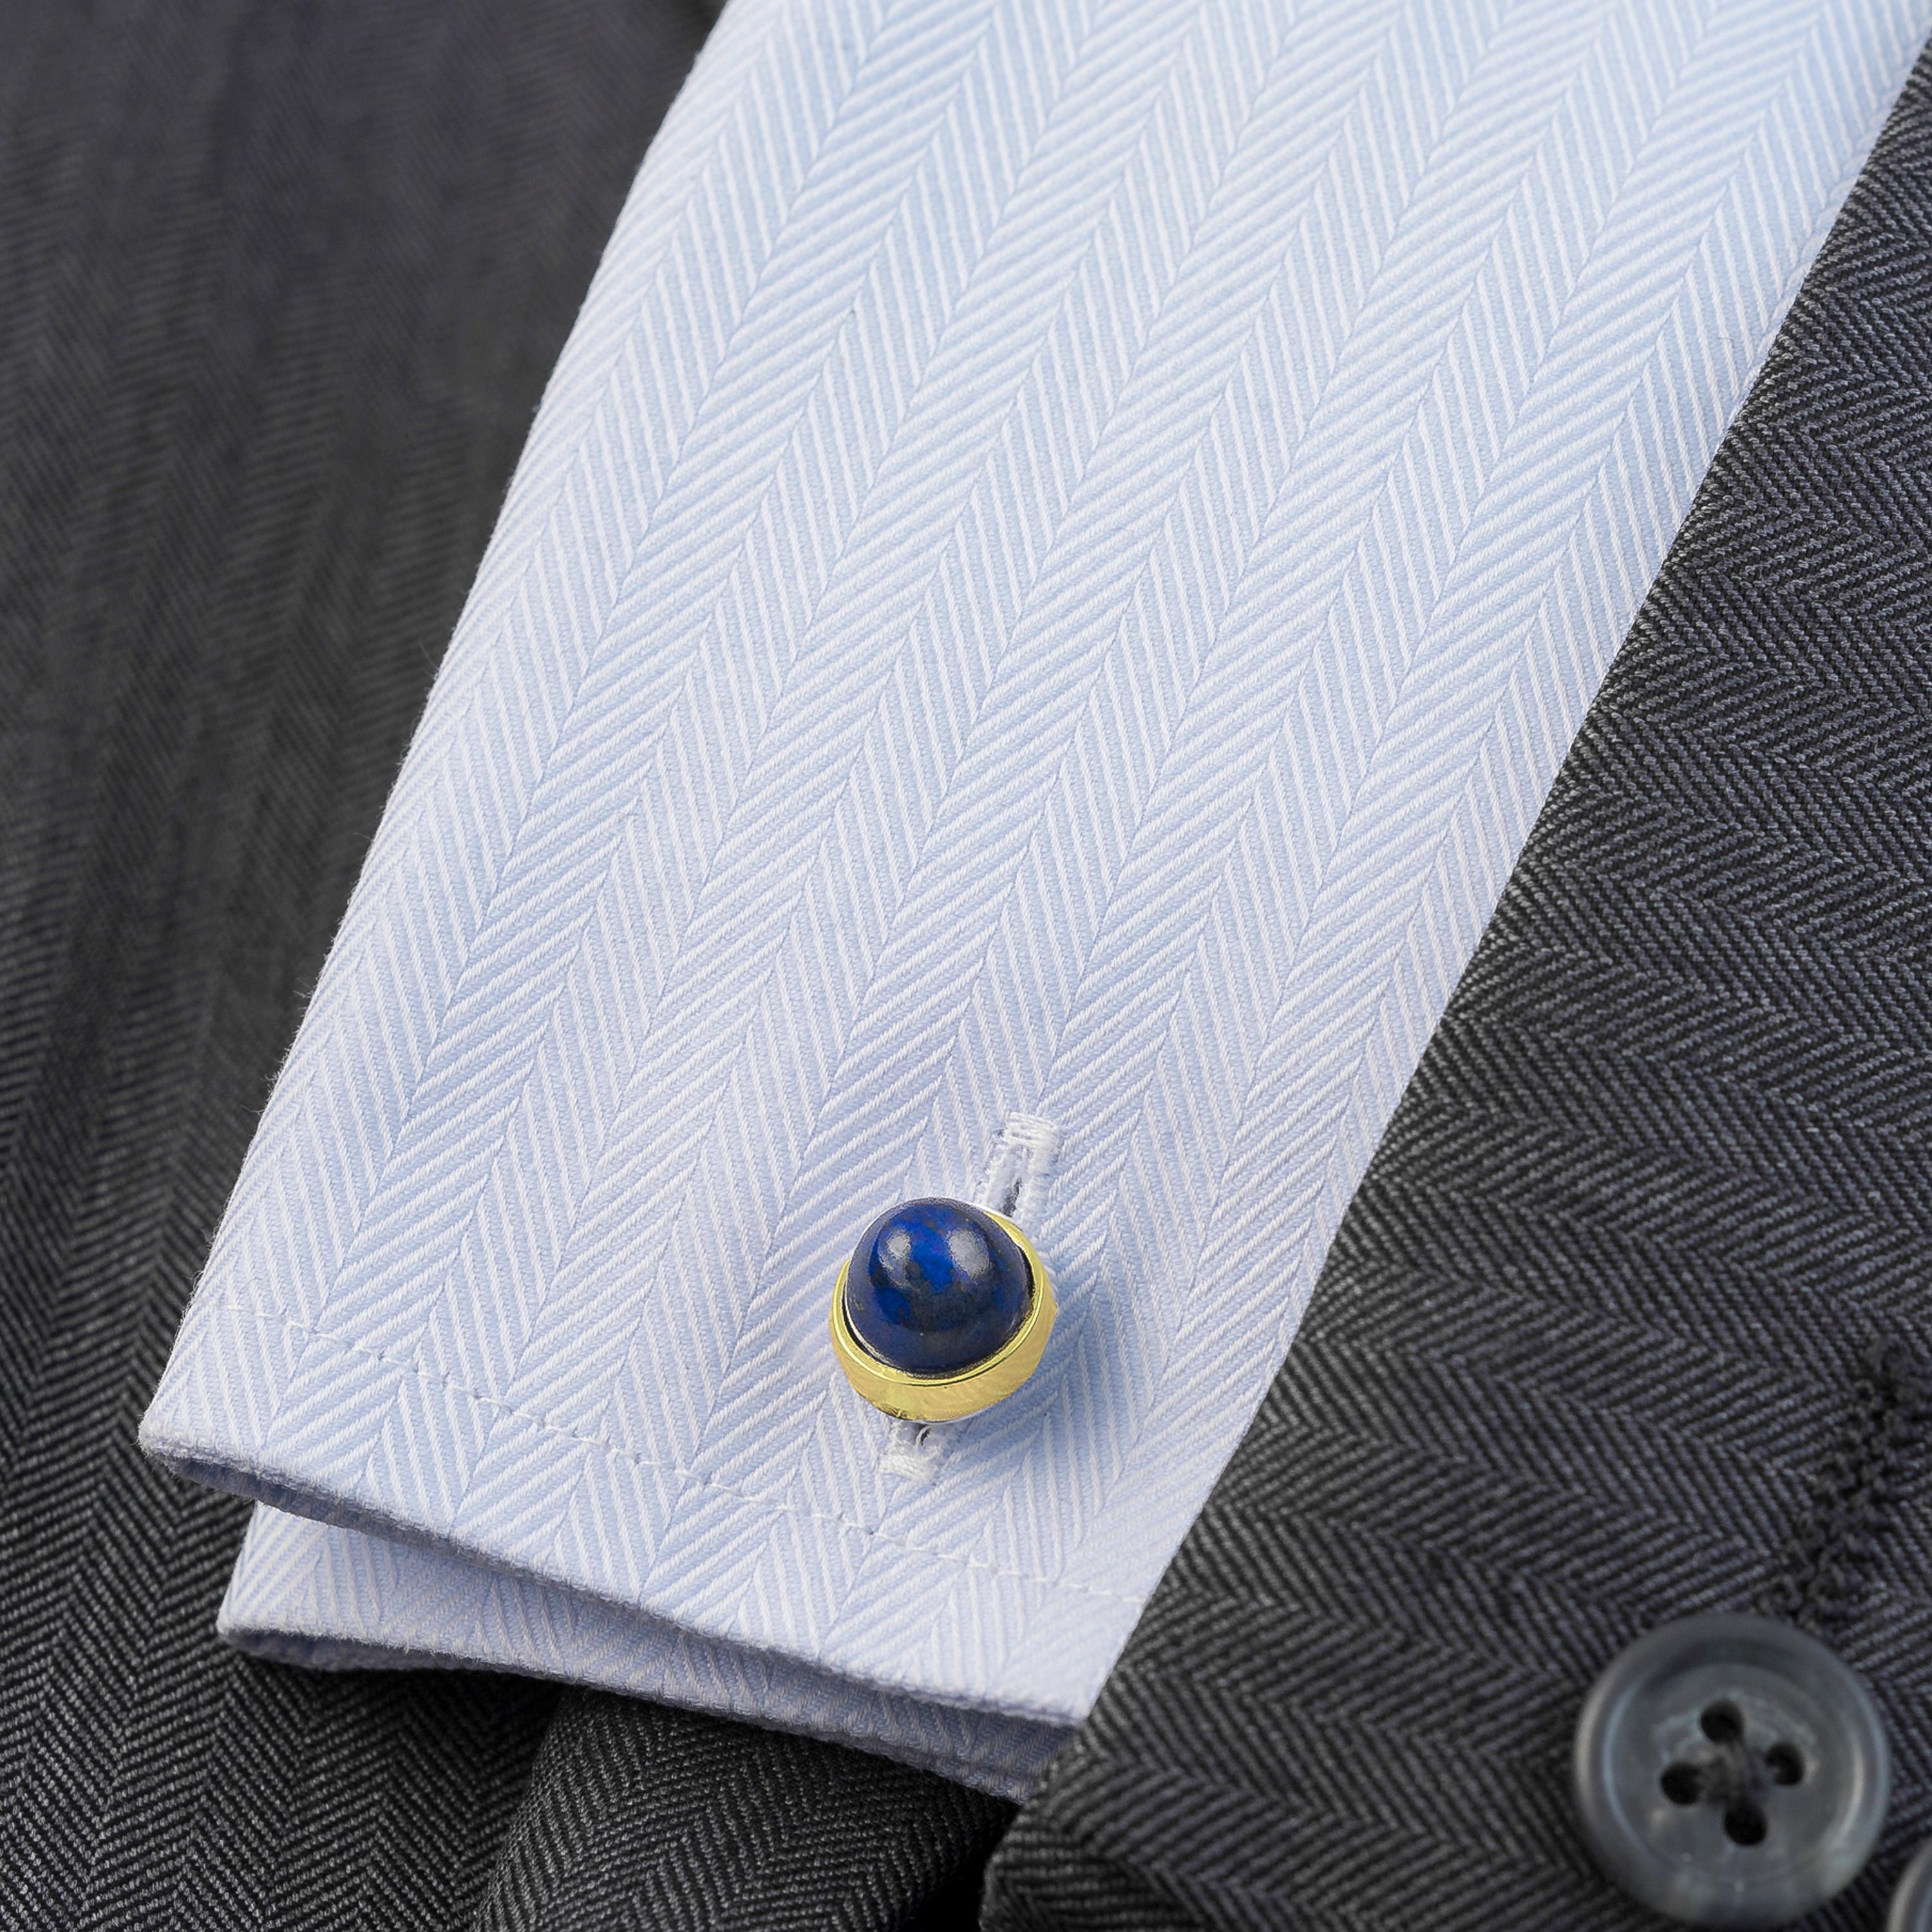 Made to order (**see below) 18k Gold and Lapis Lazuli cufflinks, designed and handmade by Alistair R in our United Kingdom workshop. 

These double sided cufflinks incorporate four round cabochon stones (total 17 Carats) with a pointed dome shape in